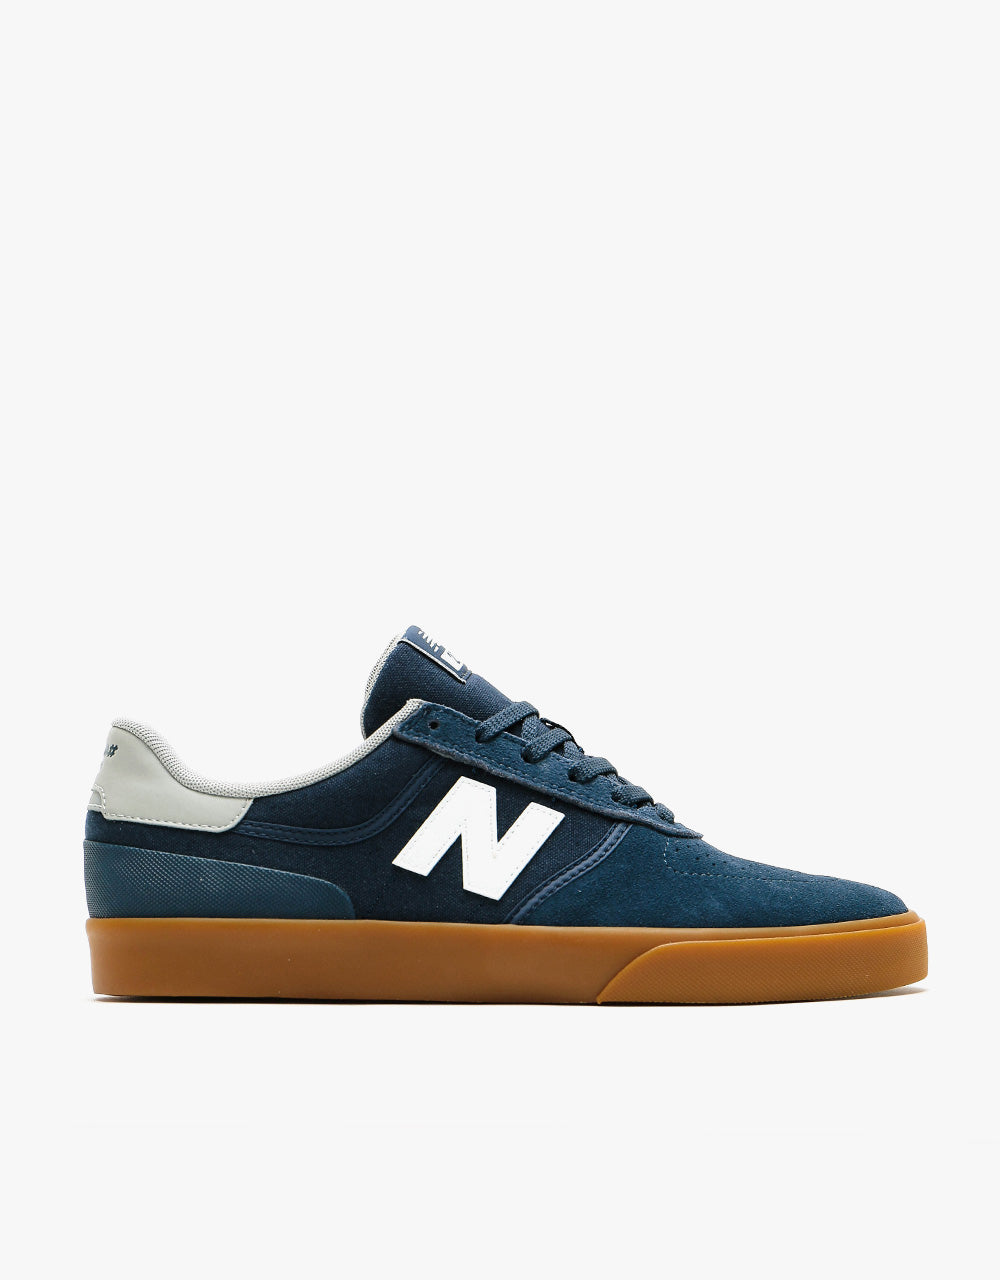 New Balance Numeric 272 Skate Shoes - Navy/Gum – Route One